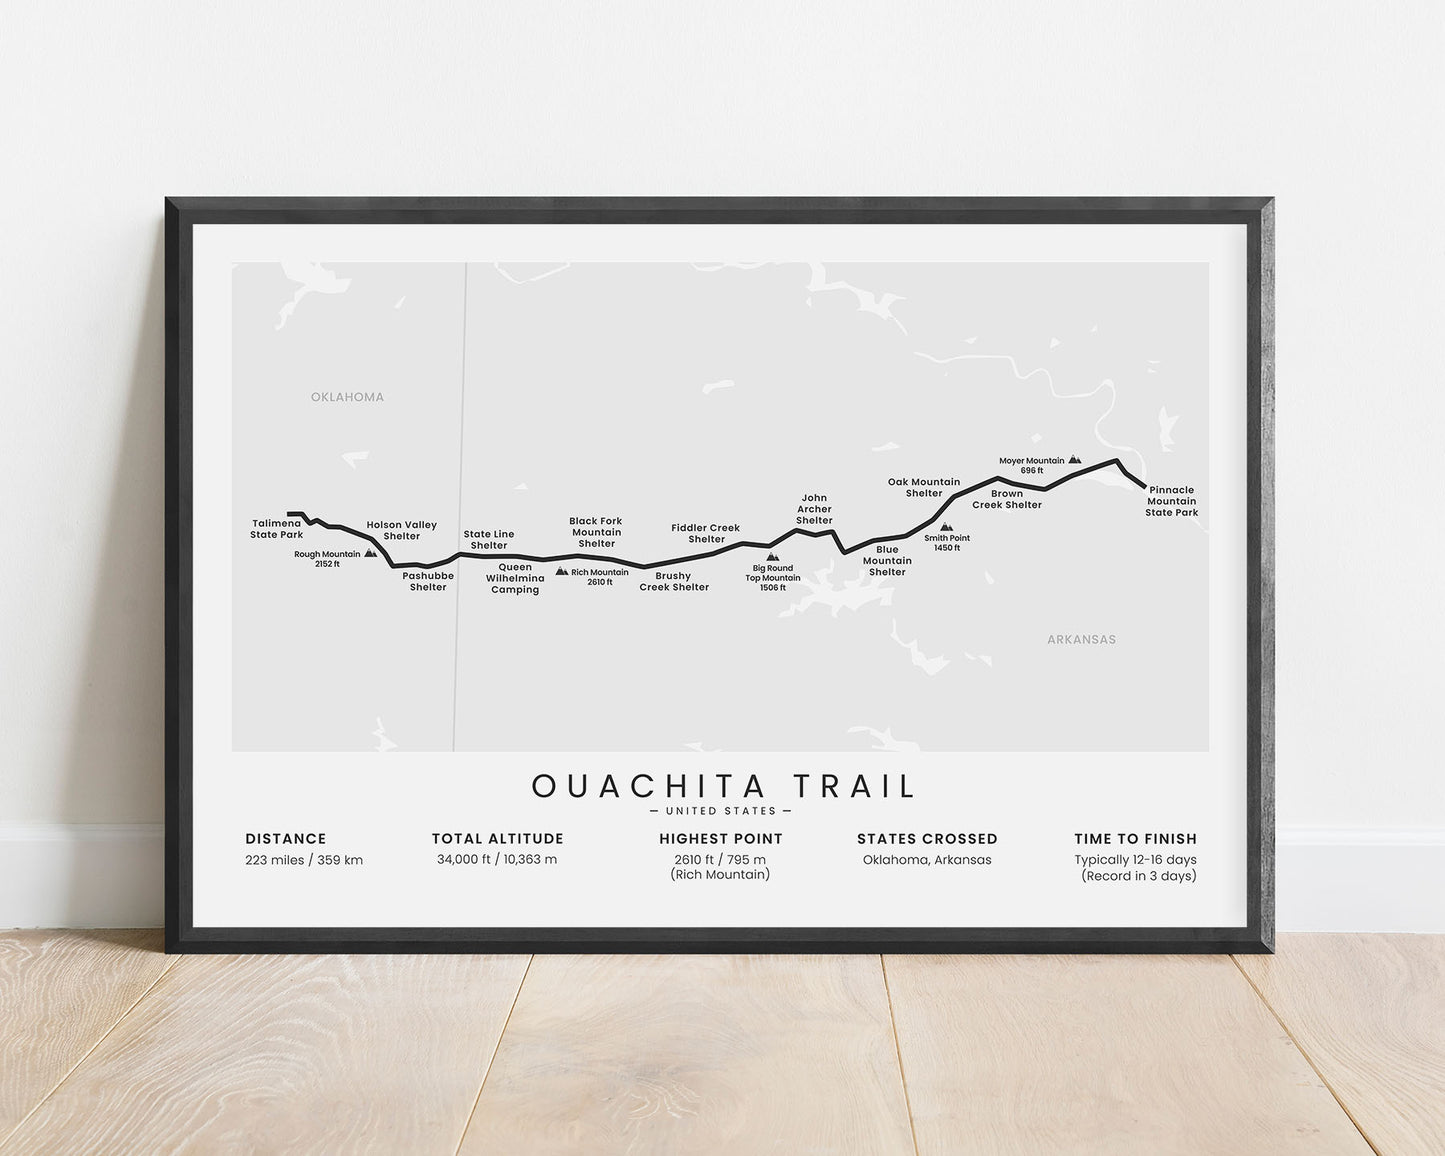 Ouachita Trail (Ouachita National Forest) hike poster art with white background